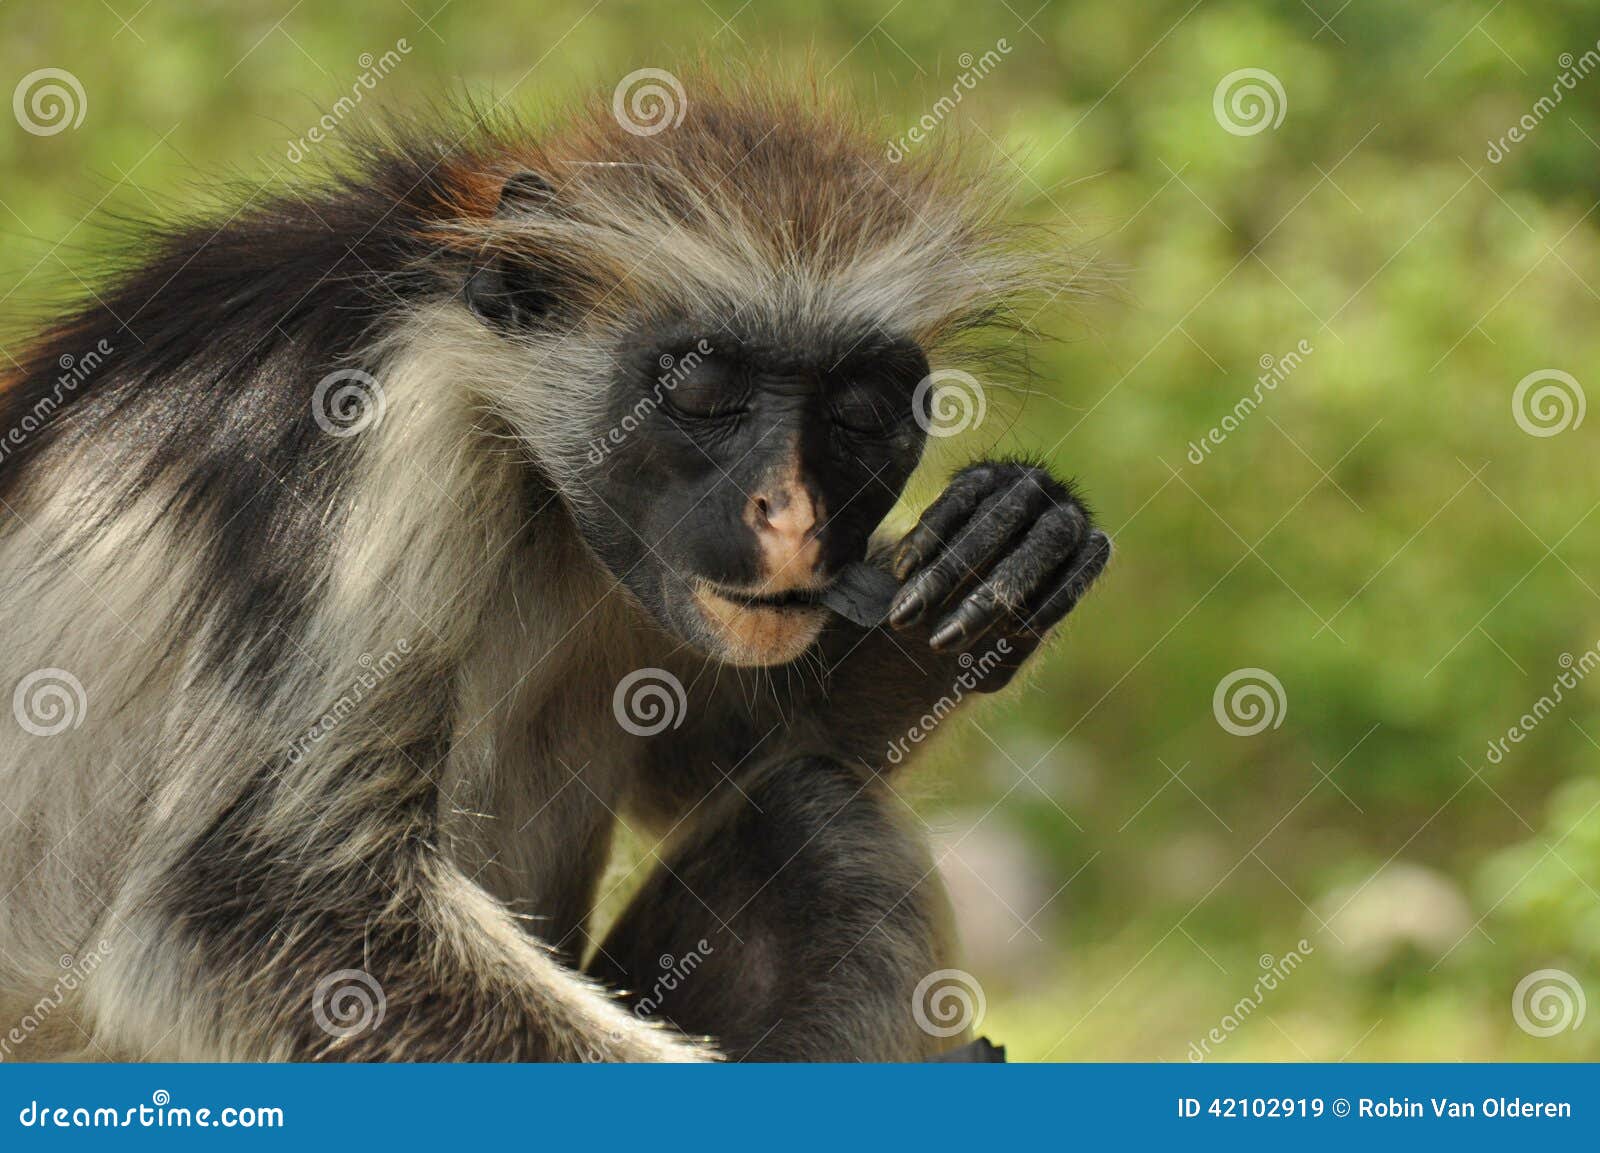 red colobus monkey eats a piece of charcoal